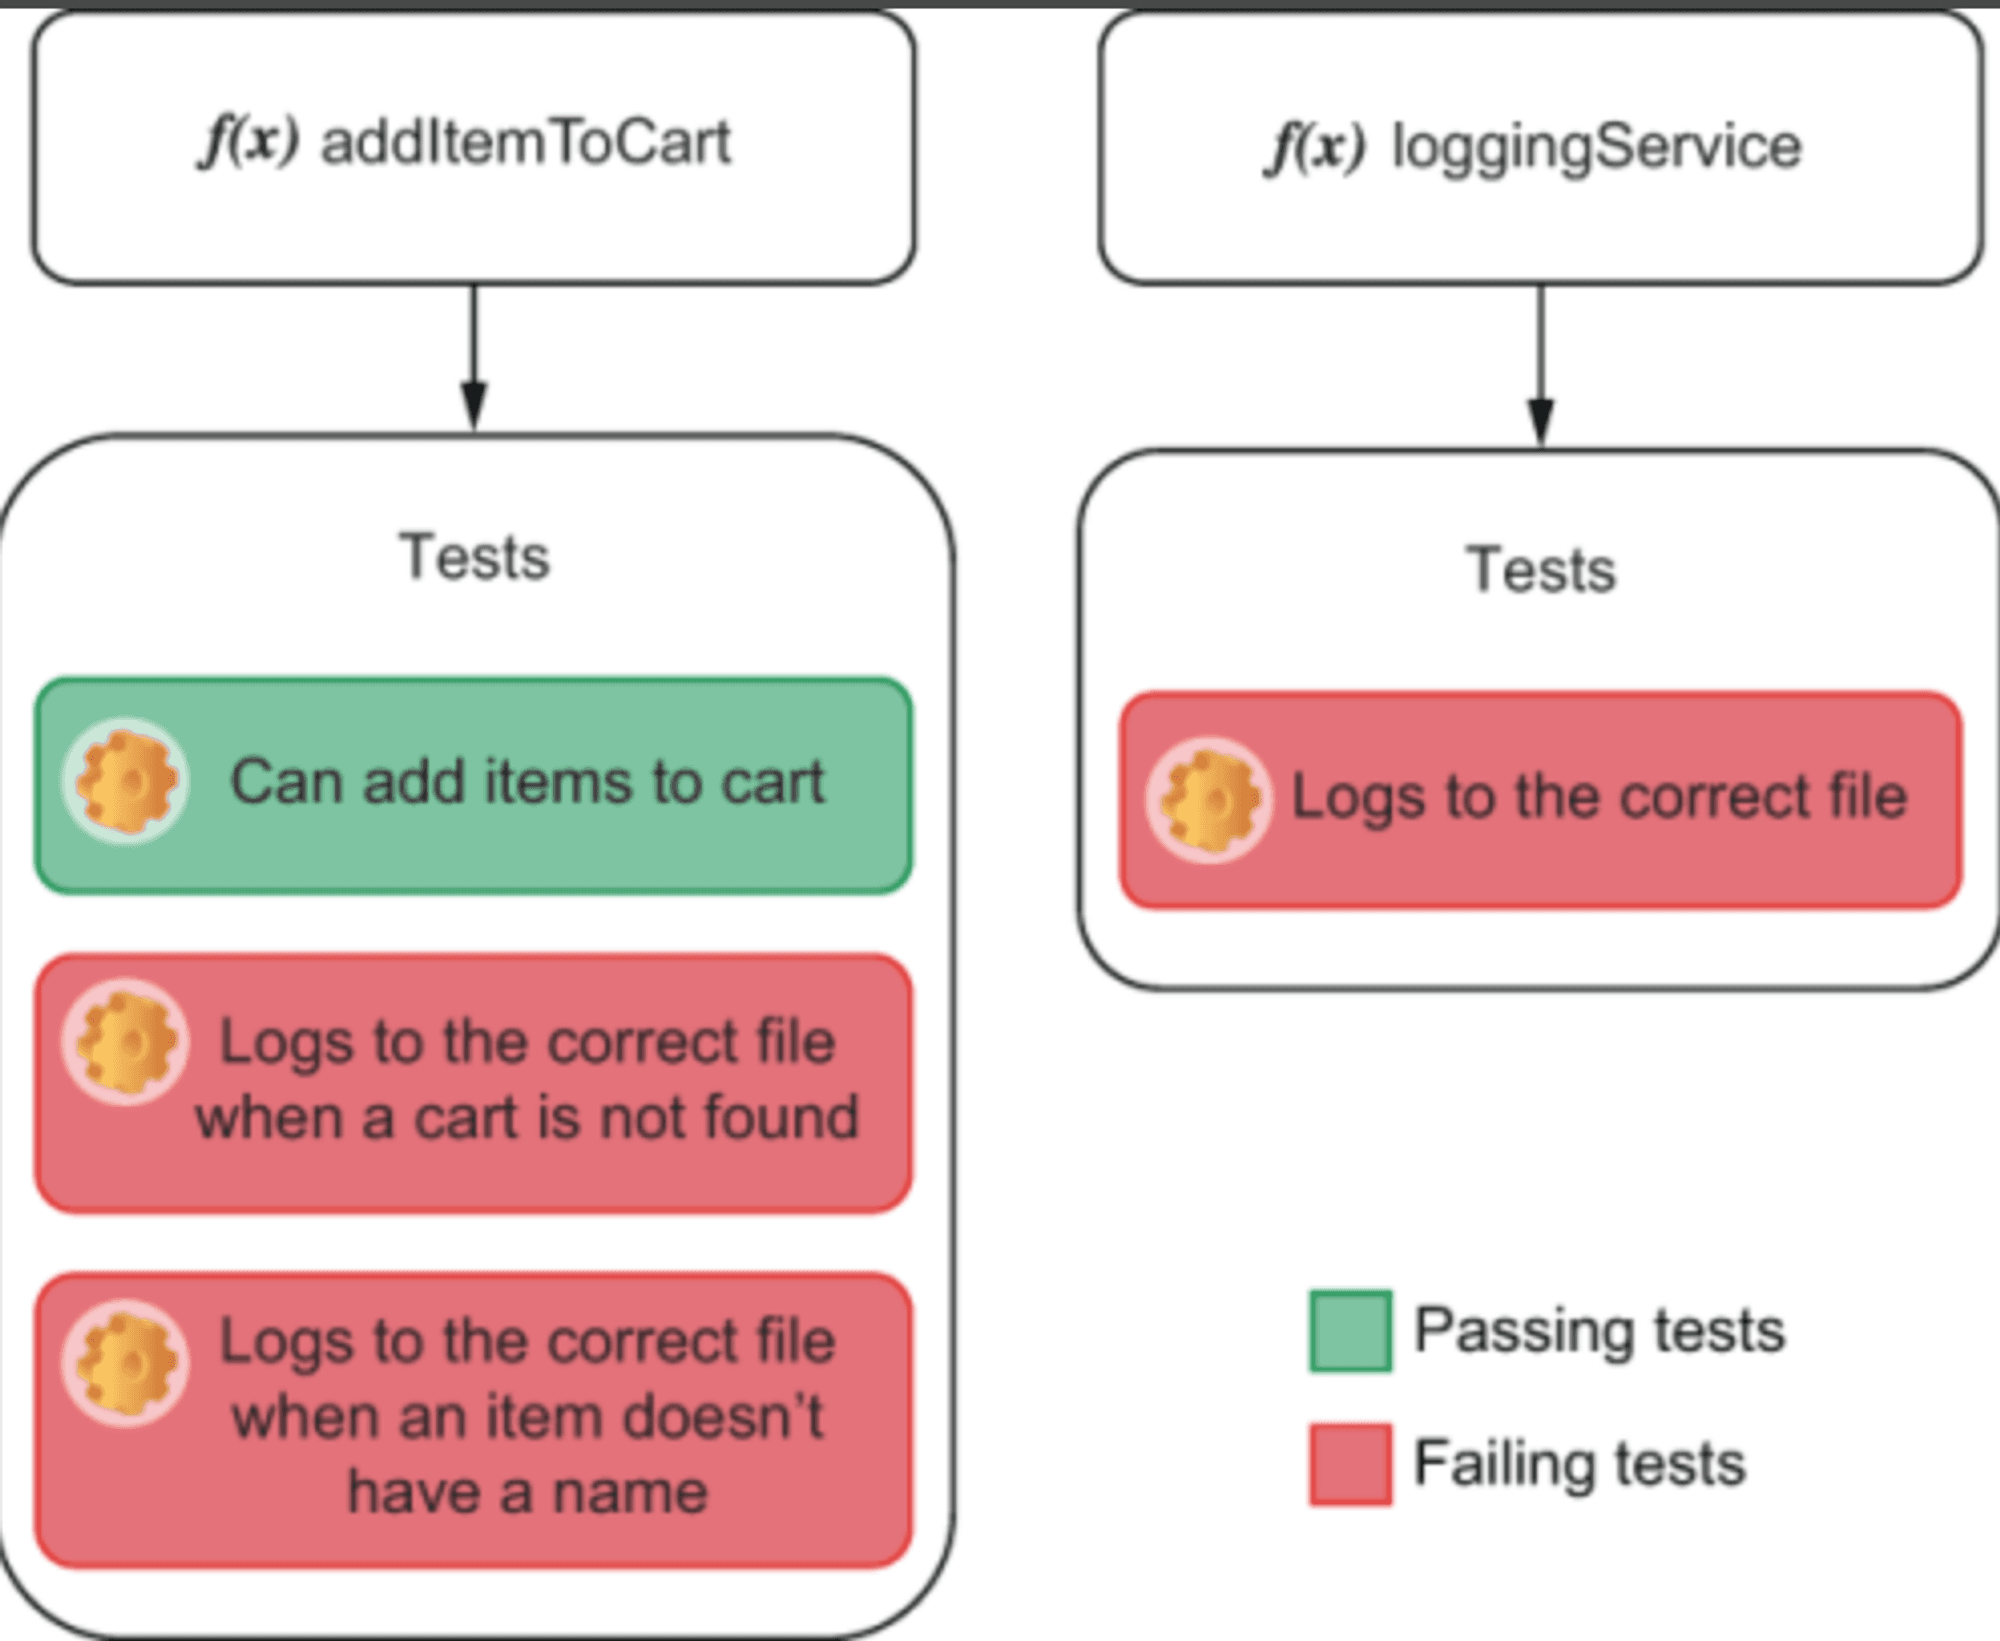 When you have multiple tests checking whether loggingService writes to the correct file, all of them will fail if you modify loggingService. The more tests you have, the higher the cost of changing loggingService becomes.